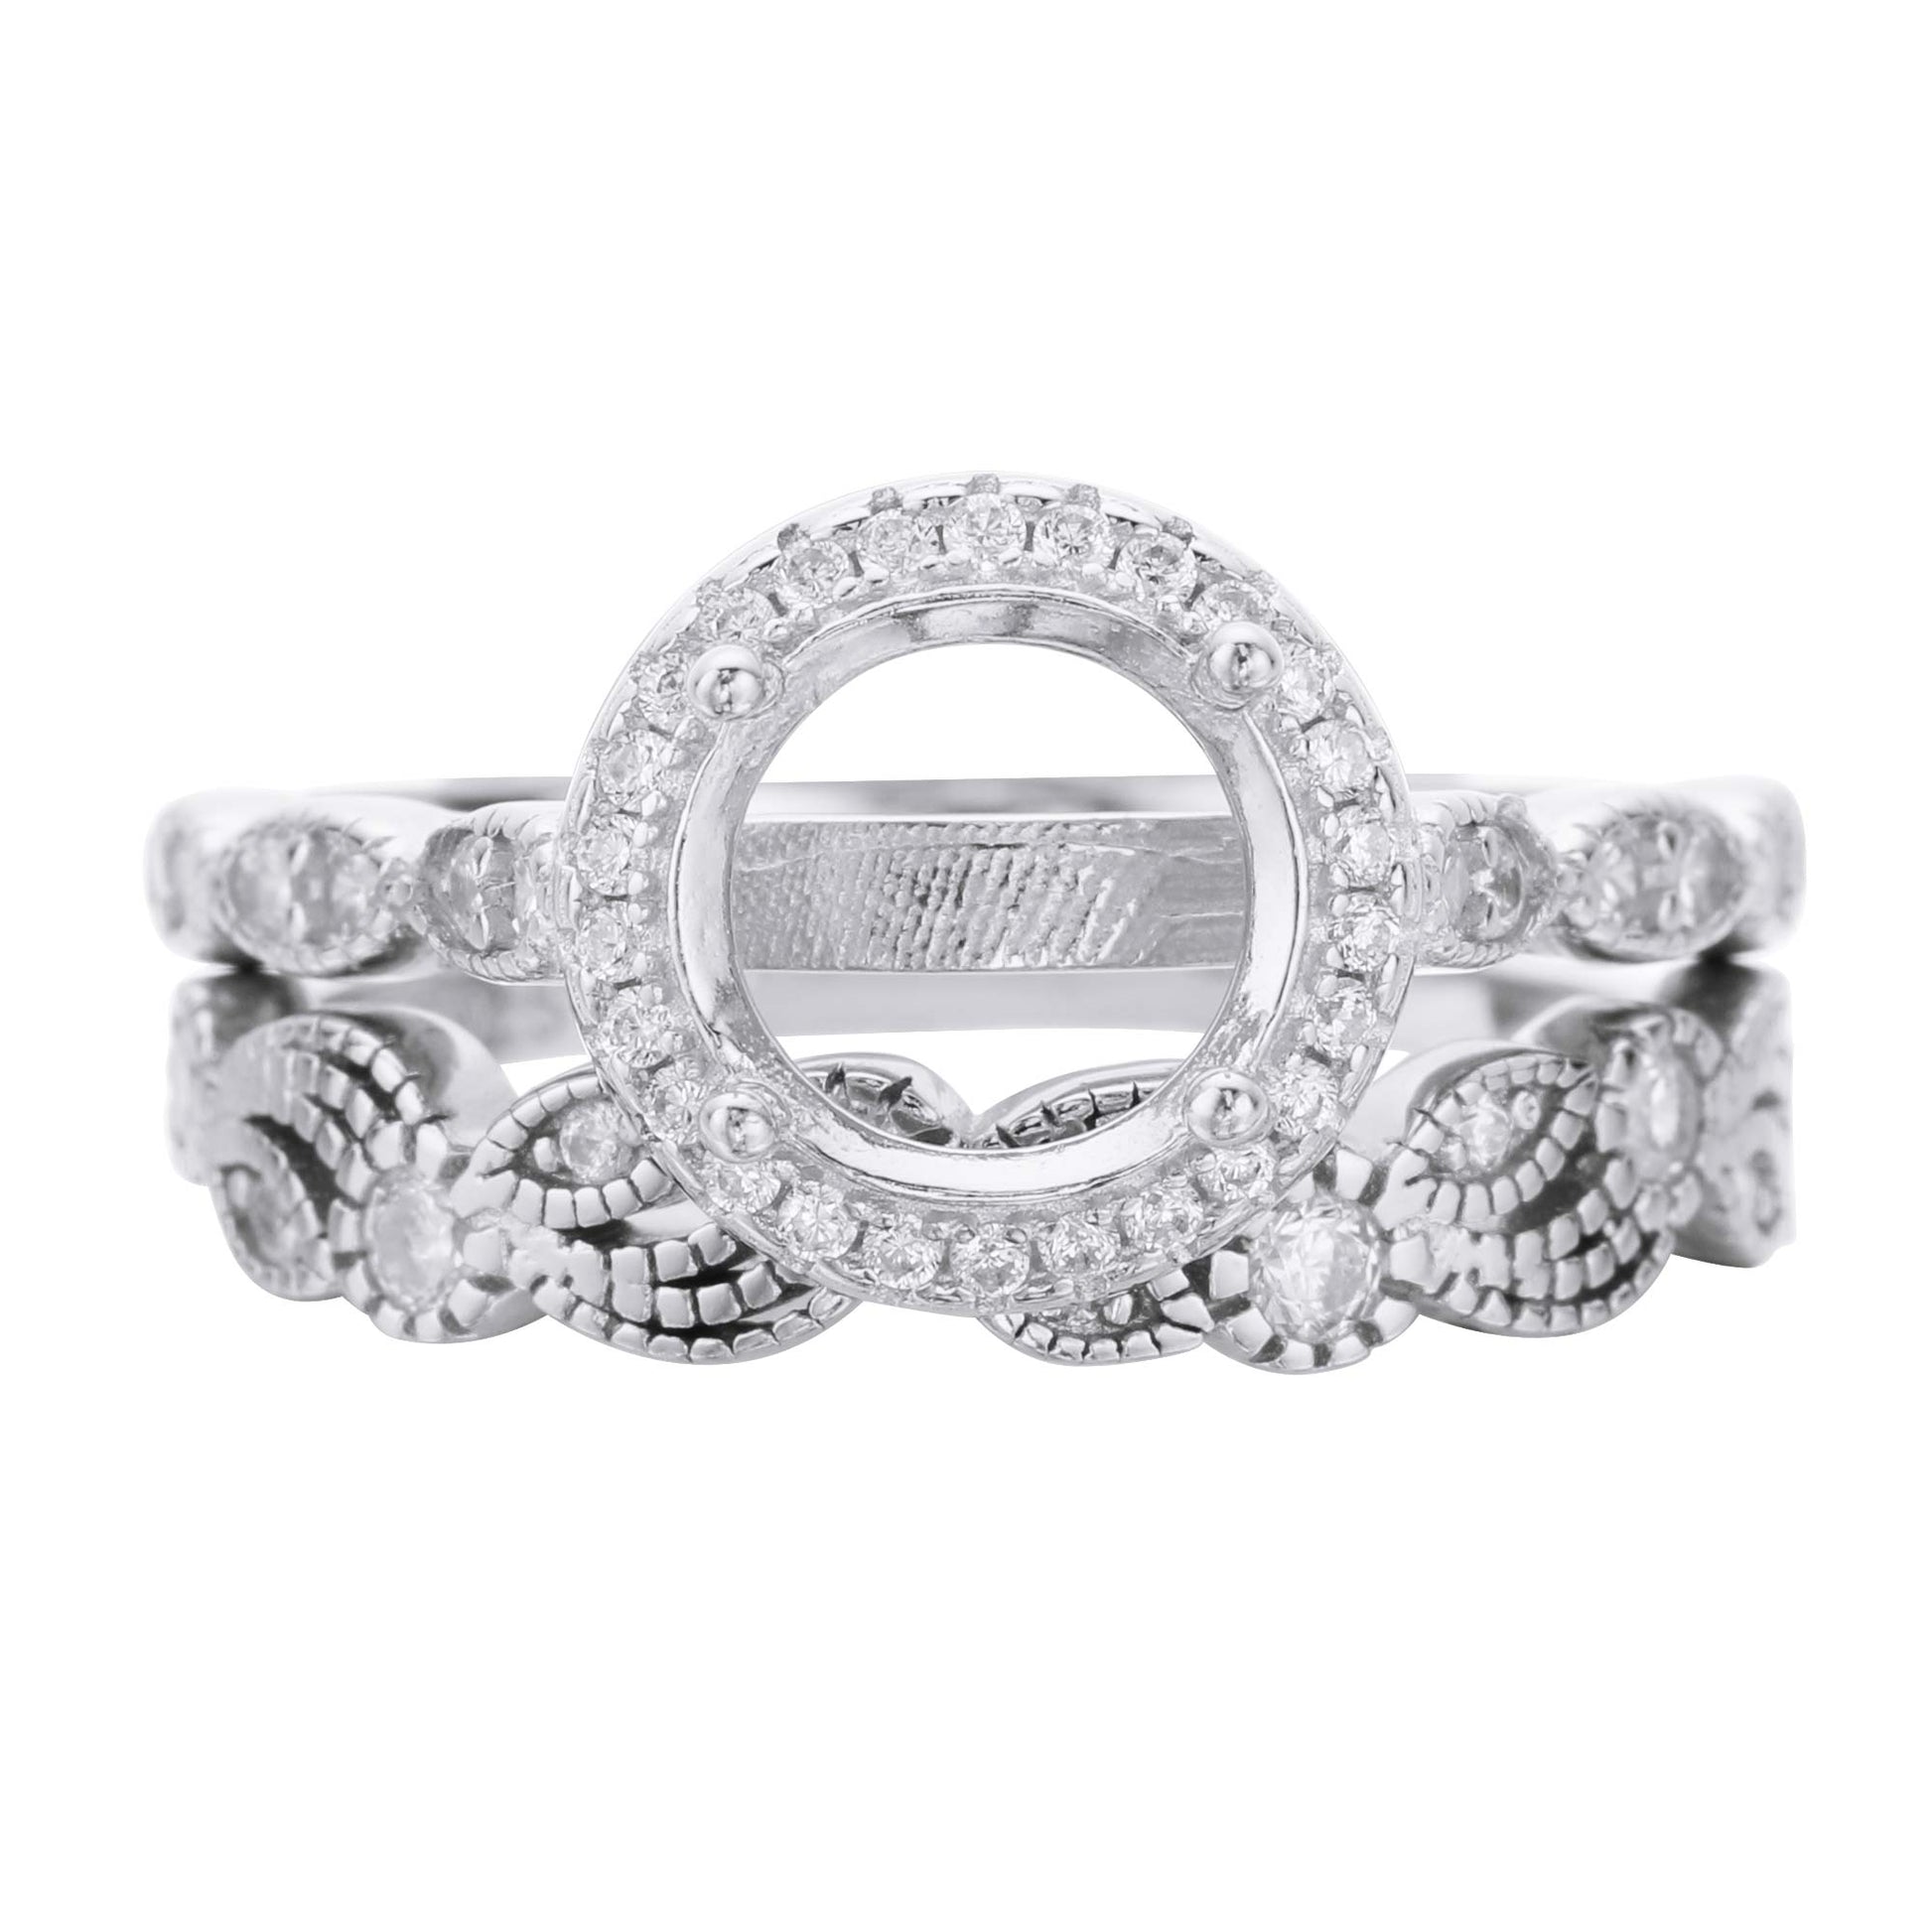 A silver art deco style halo semi mount with a filigree wave and gem studded design wedding band.